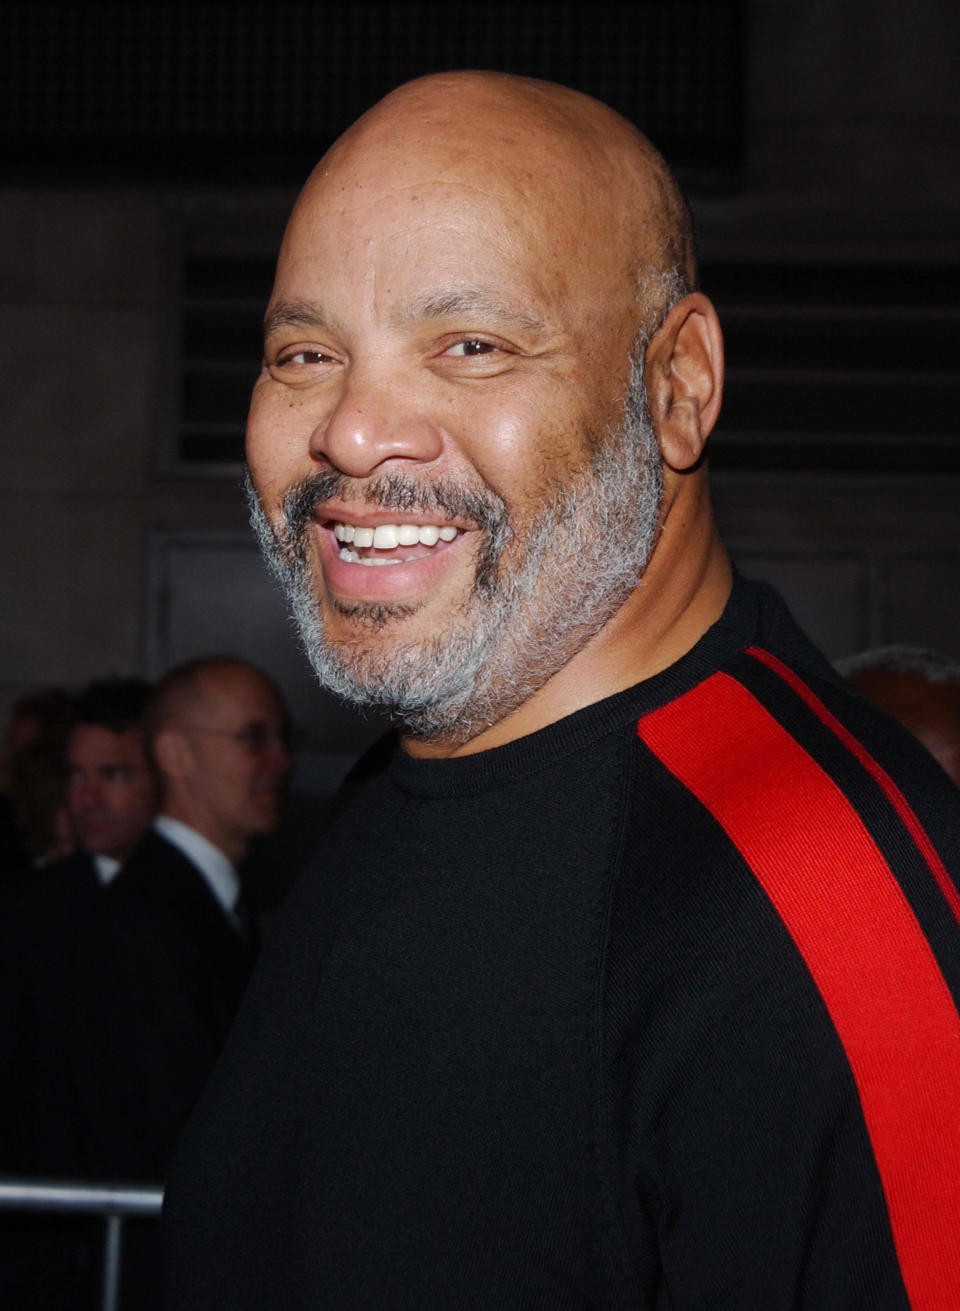 Avery died at the age of 68 from complications following open heart surgery in a Los Angeles suburb hospital on Dec. 31, 2013